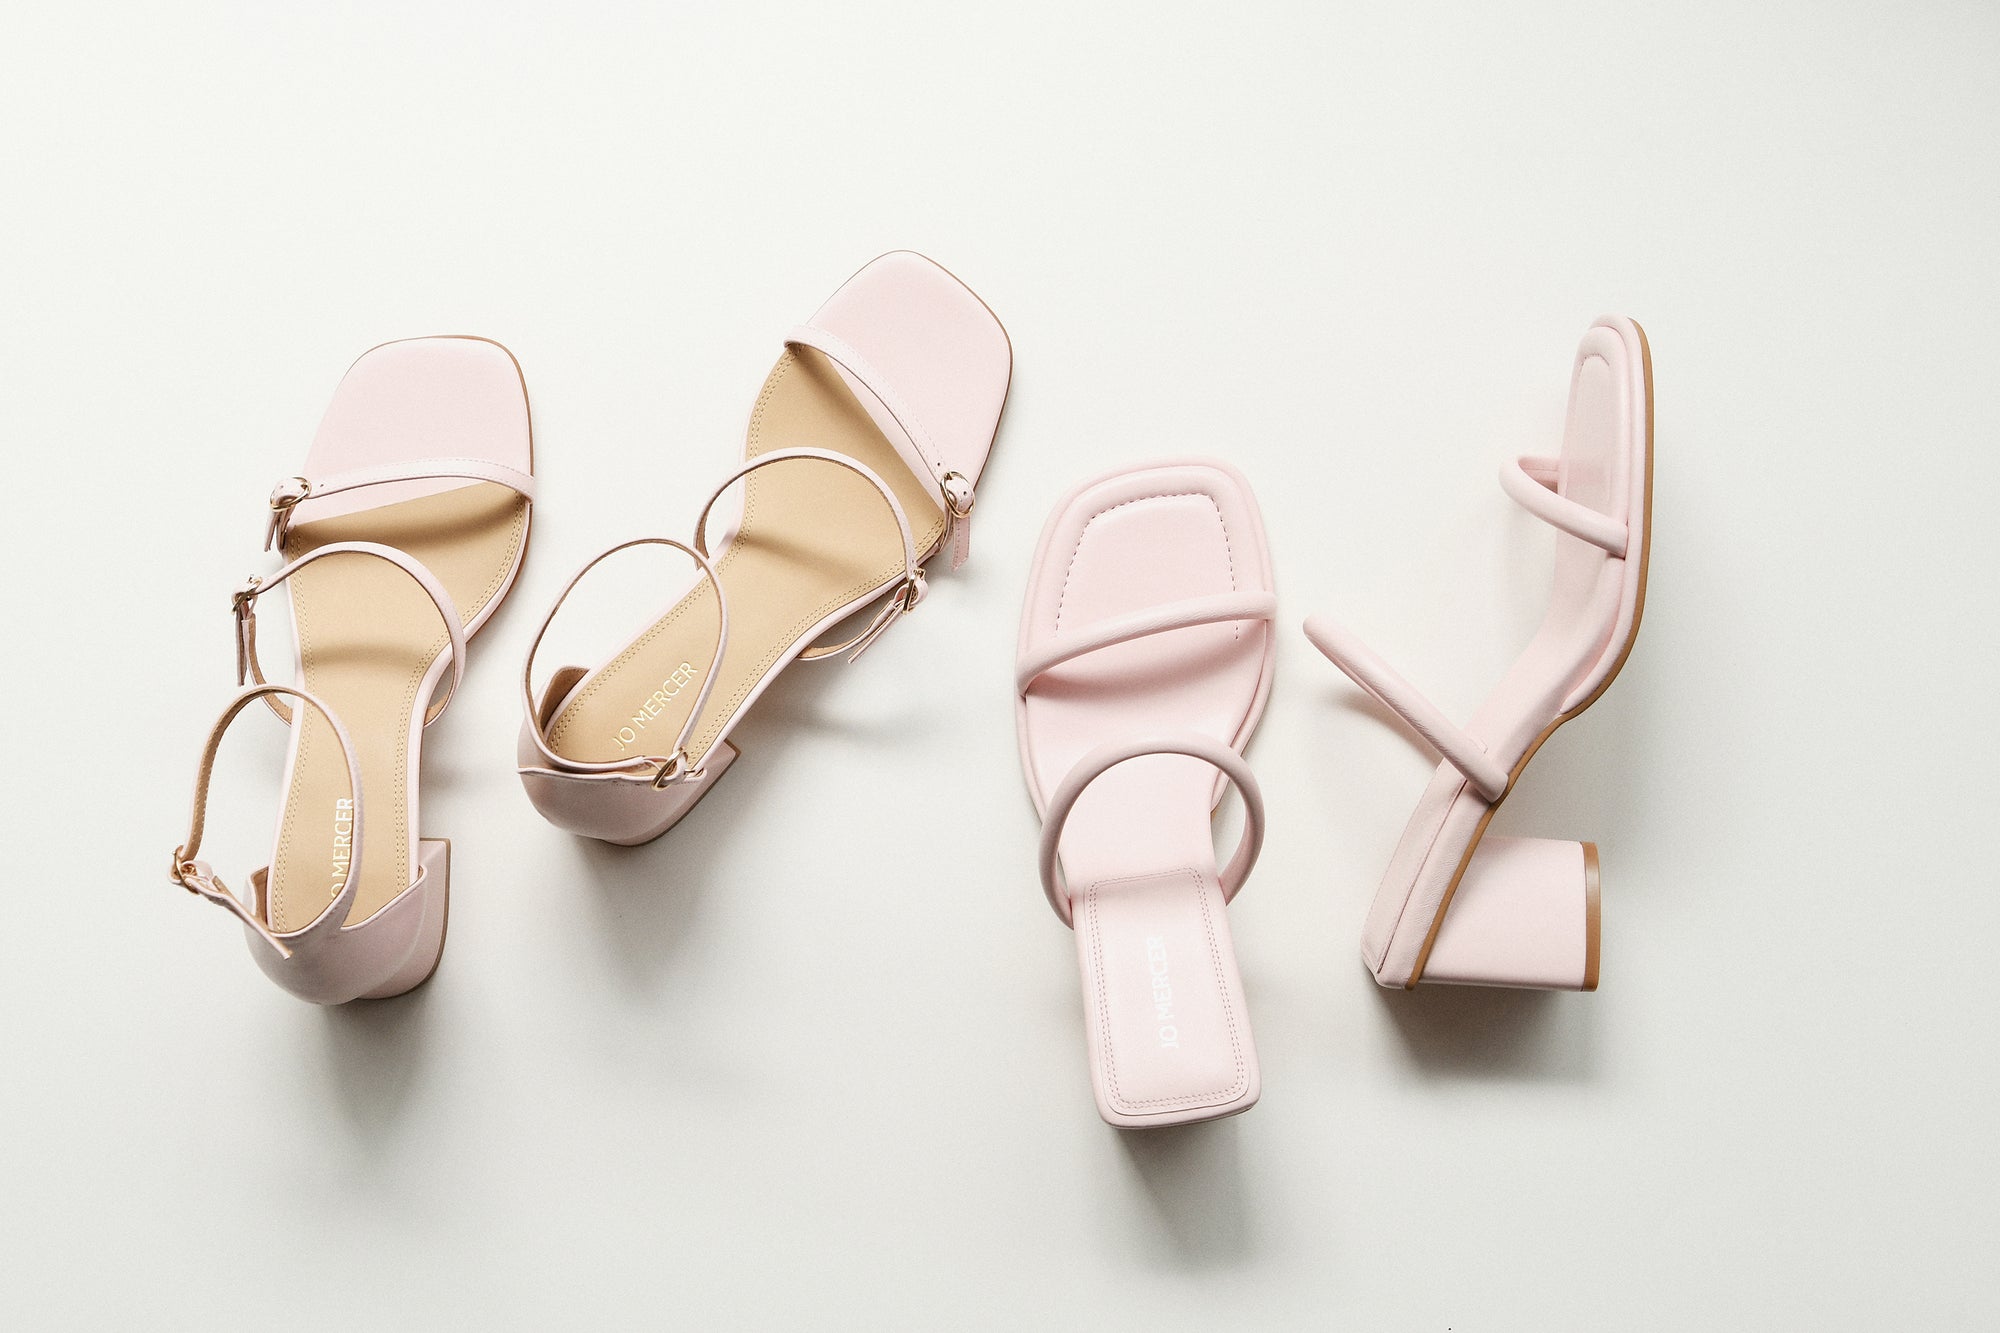 FINDING THE PERFECT LADIES SHOES FOR ANY WEDDING